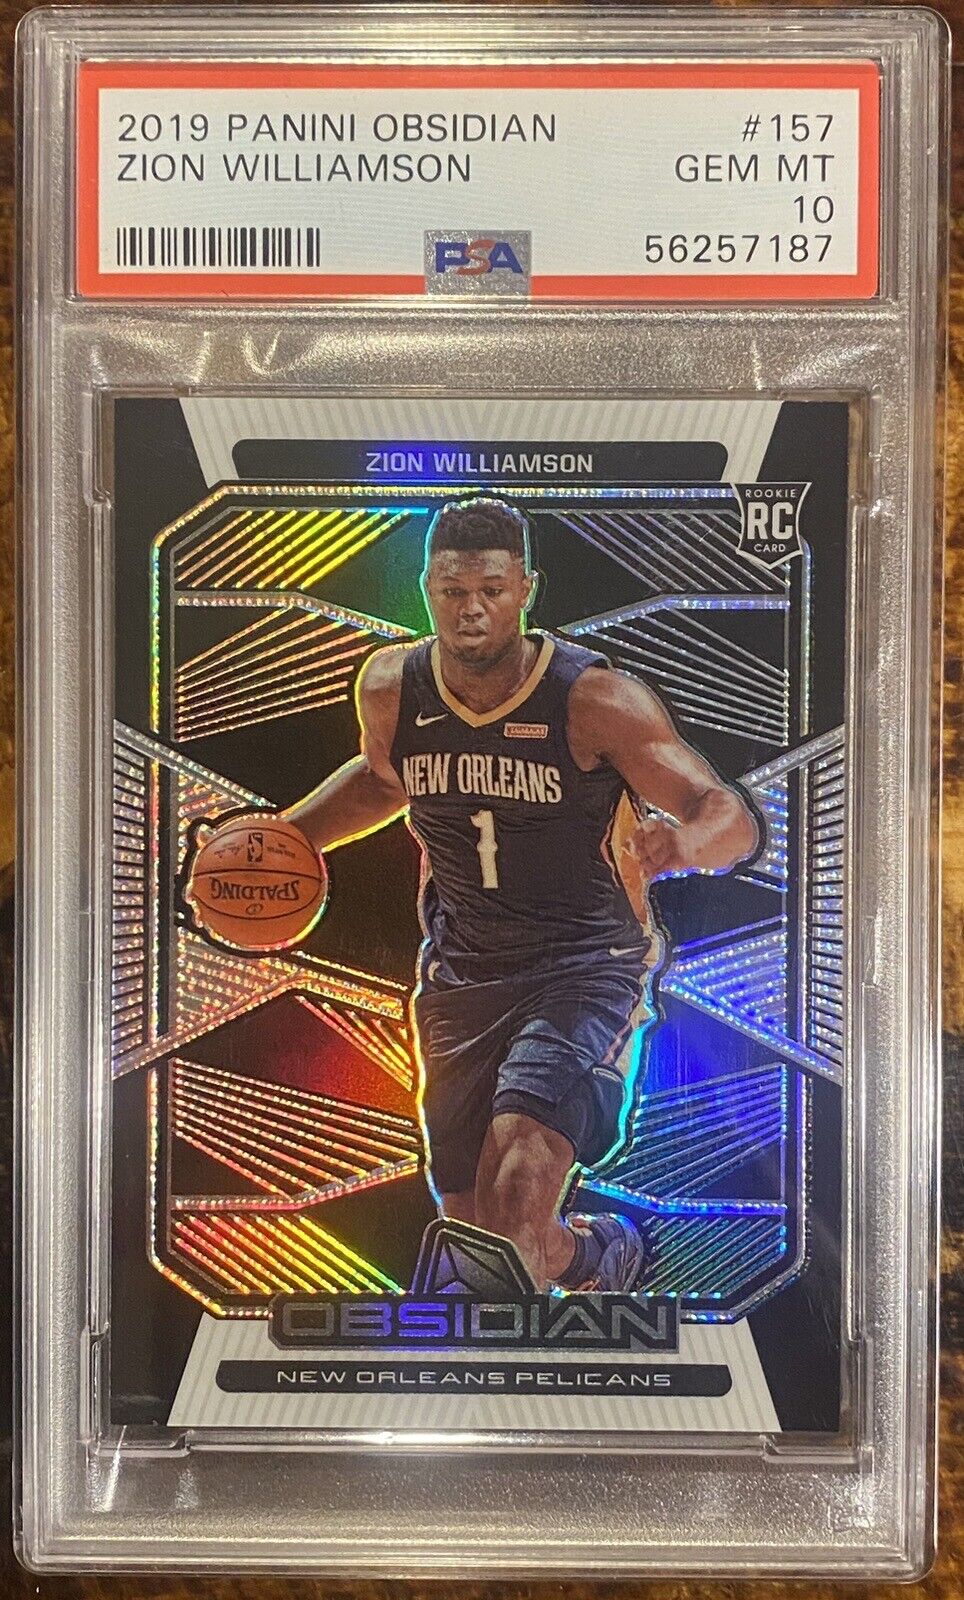 Zion Williamson ROOKIE PSA 10 2019 Panini Obsidian New Orleans Pelicans #157